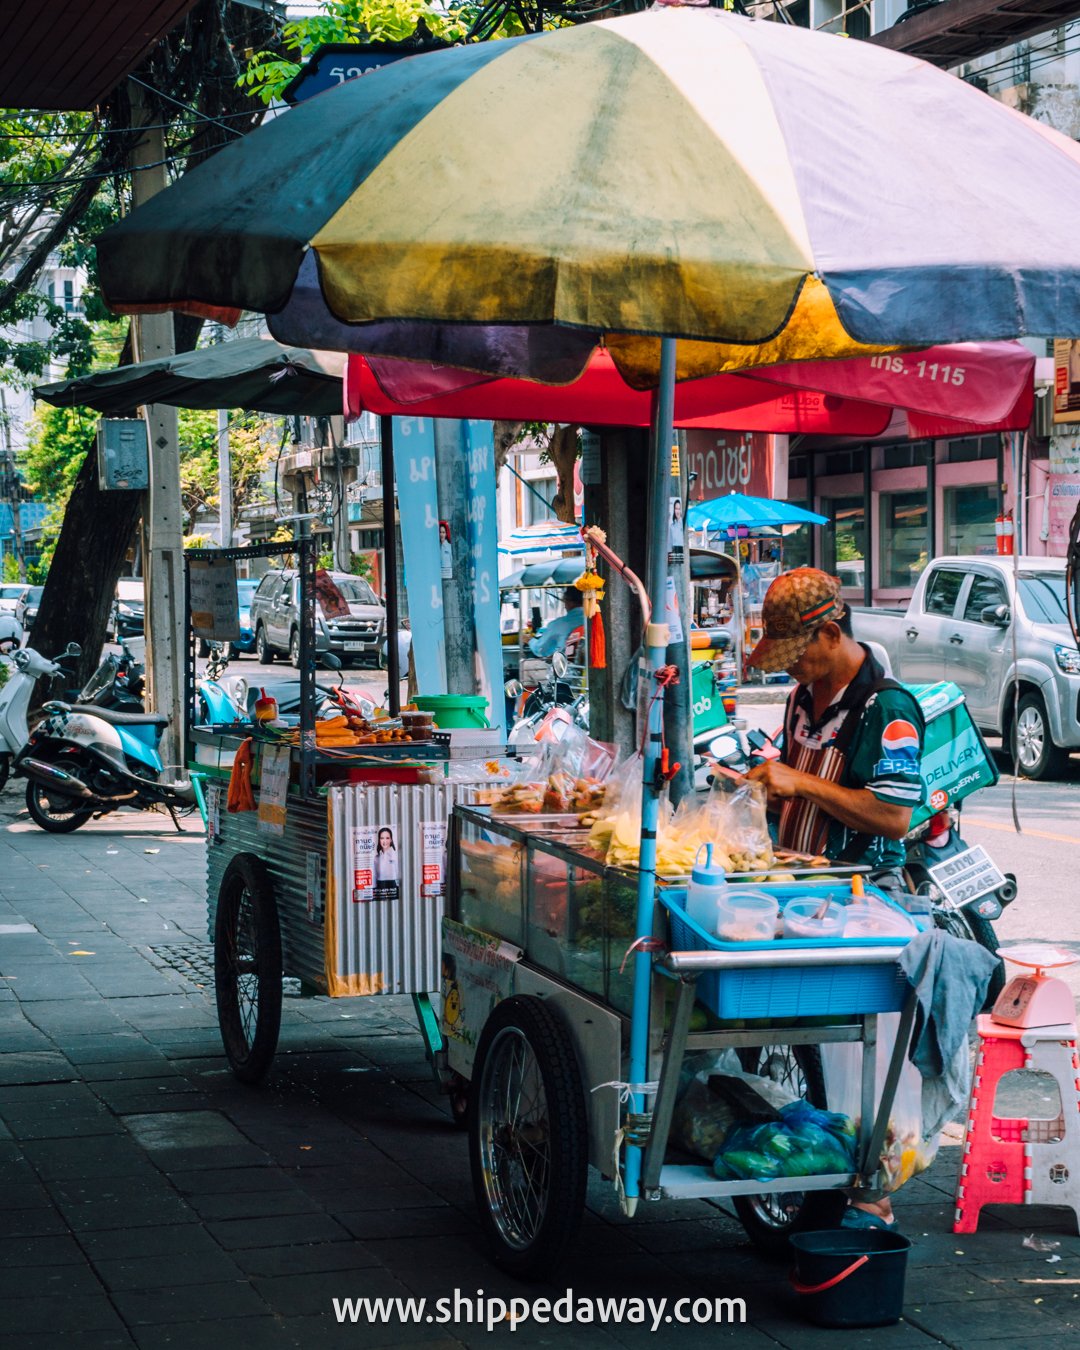 Street vendors in the streets of Bangkok, Thailand